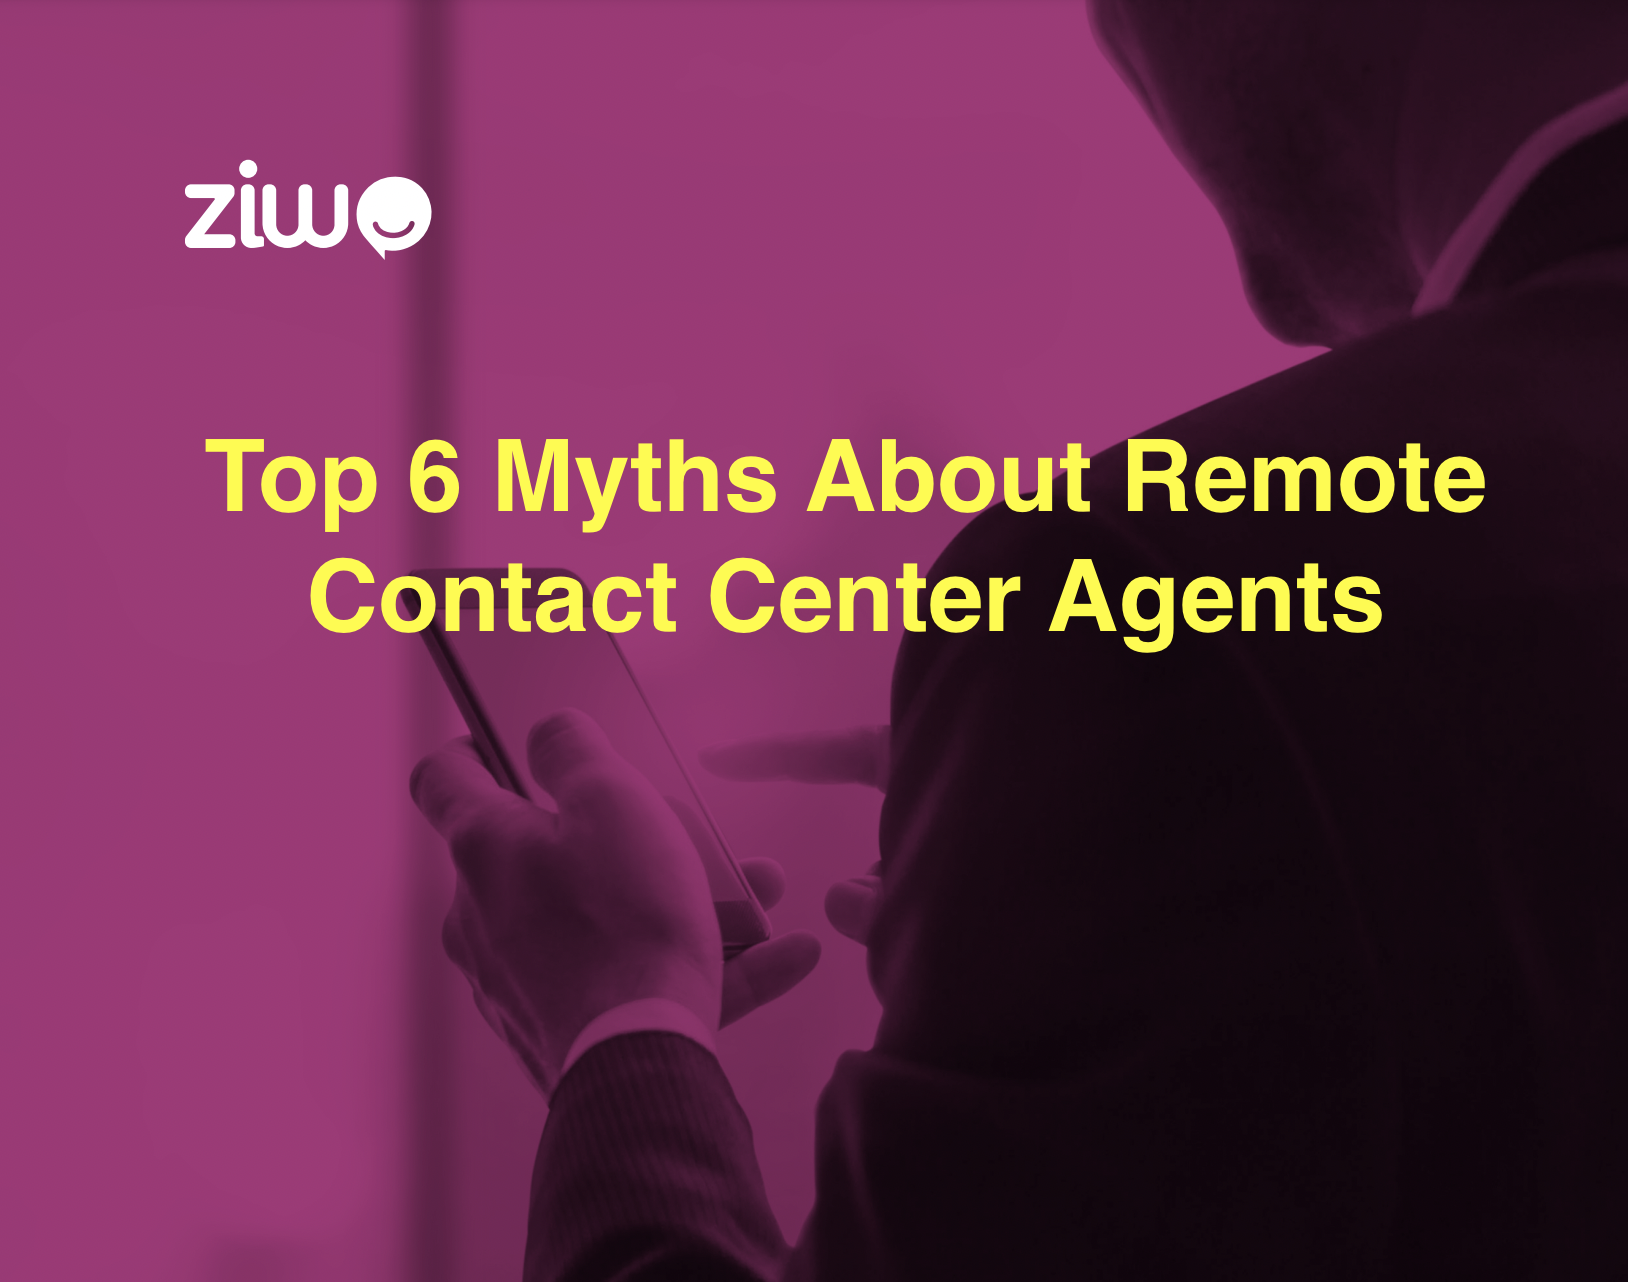 Top 6 myths about remote contact center agents.